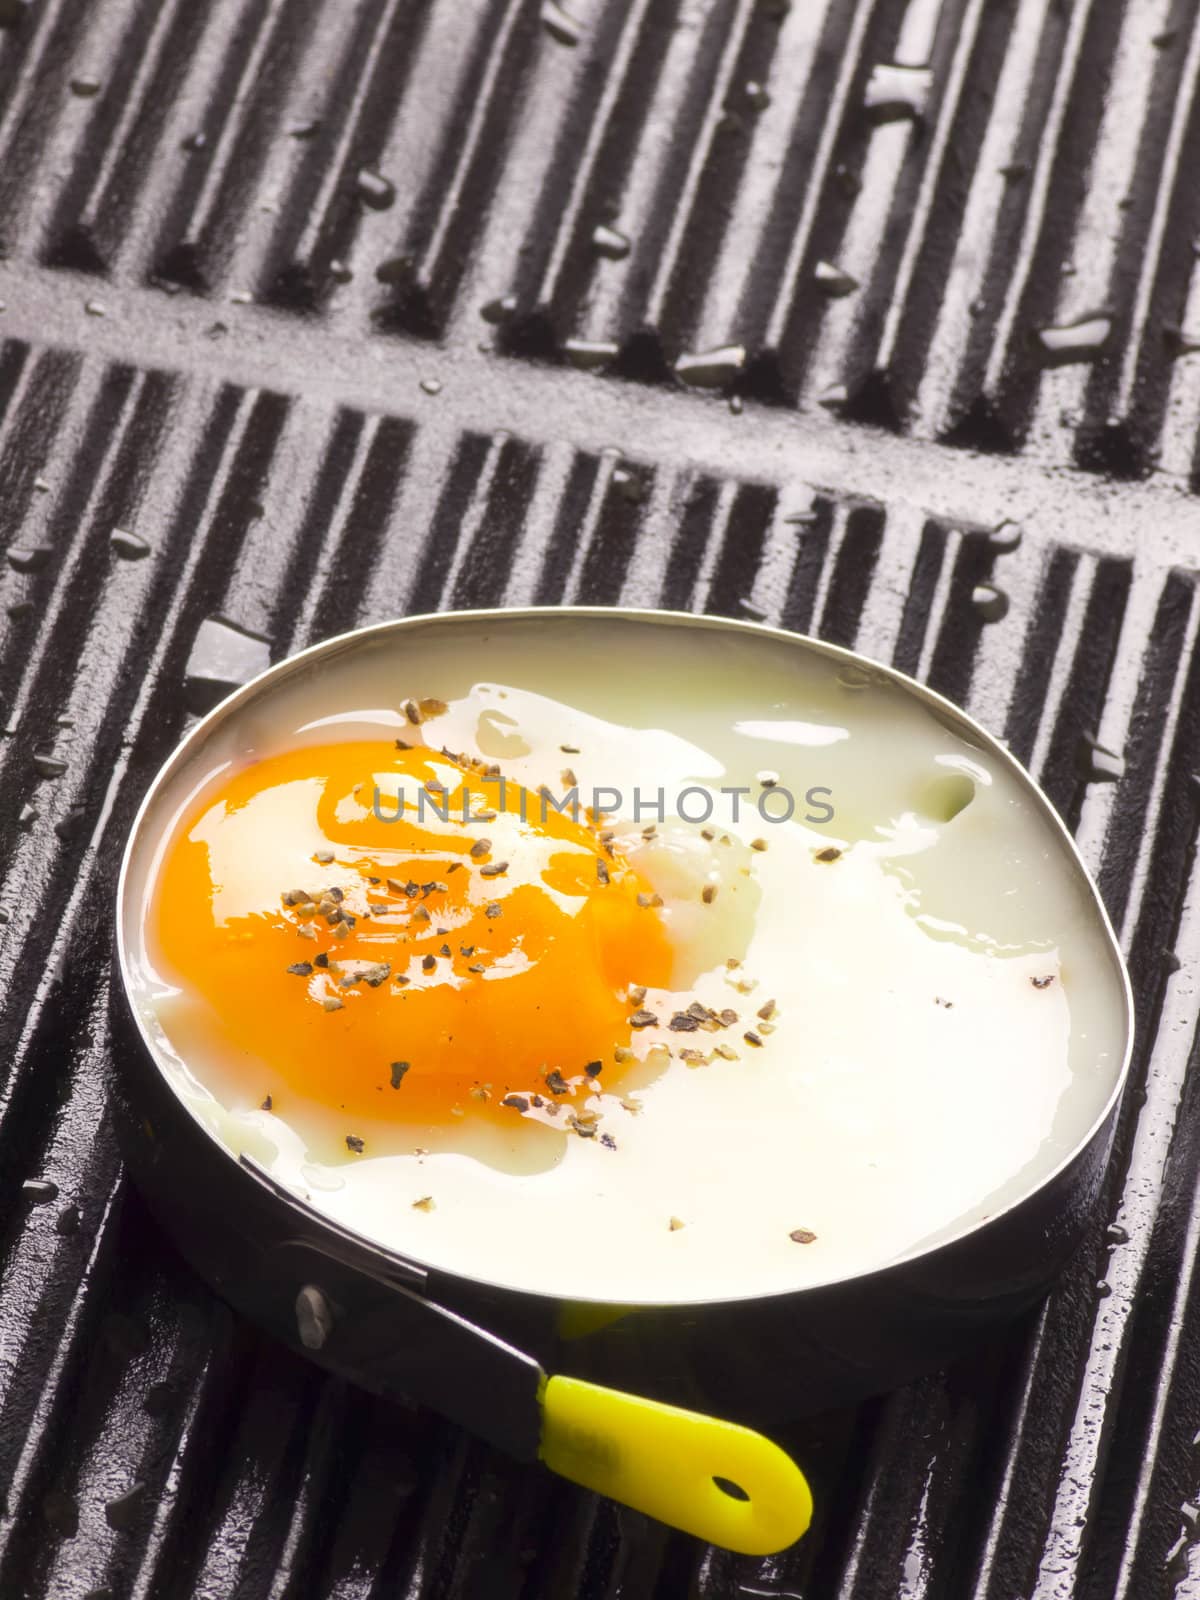 fried egg on a grill by zkruger